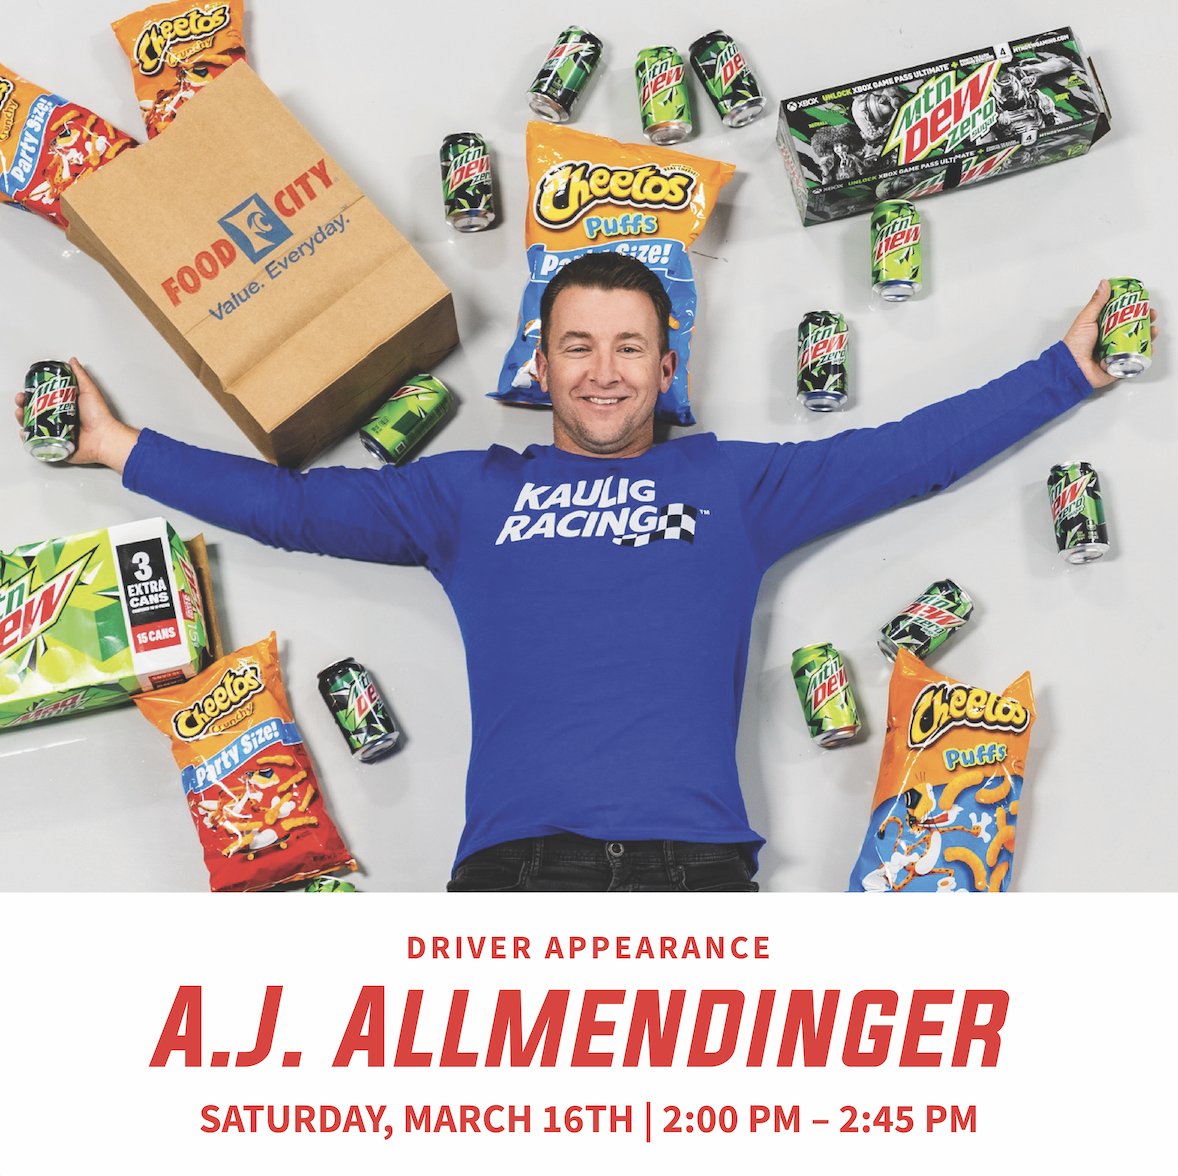 TODAY!! 📣 A.J. Allmendinger will be making an appearance at the Blountville Food City (1921 Highway 394) on Sat, 3/16 from 2–2:45pm. 🏁 Autographs will be given on a first come, first-serve basis to the first 100 people in line to obtain a wristband.